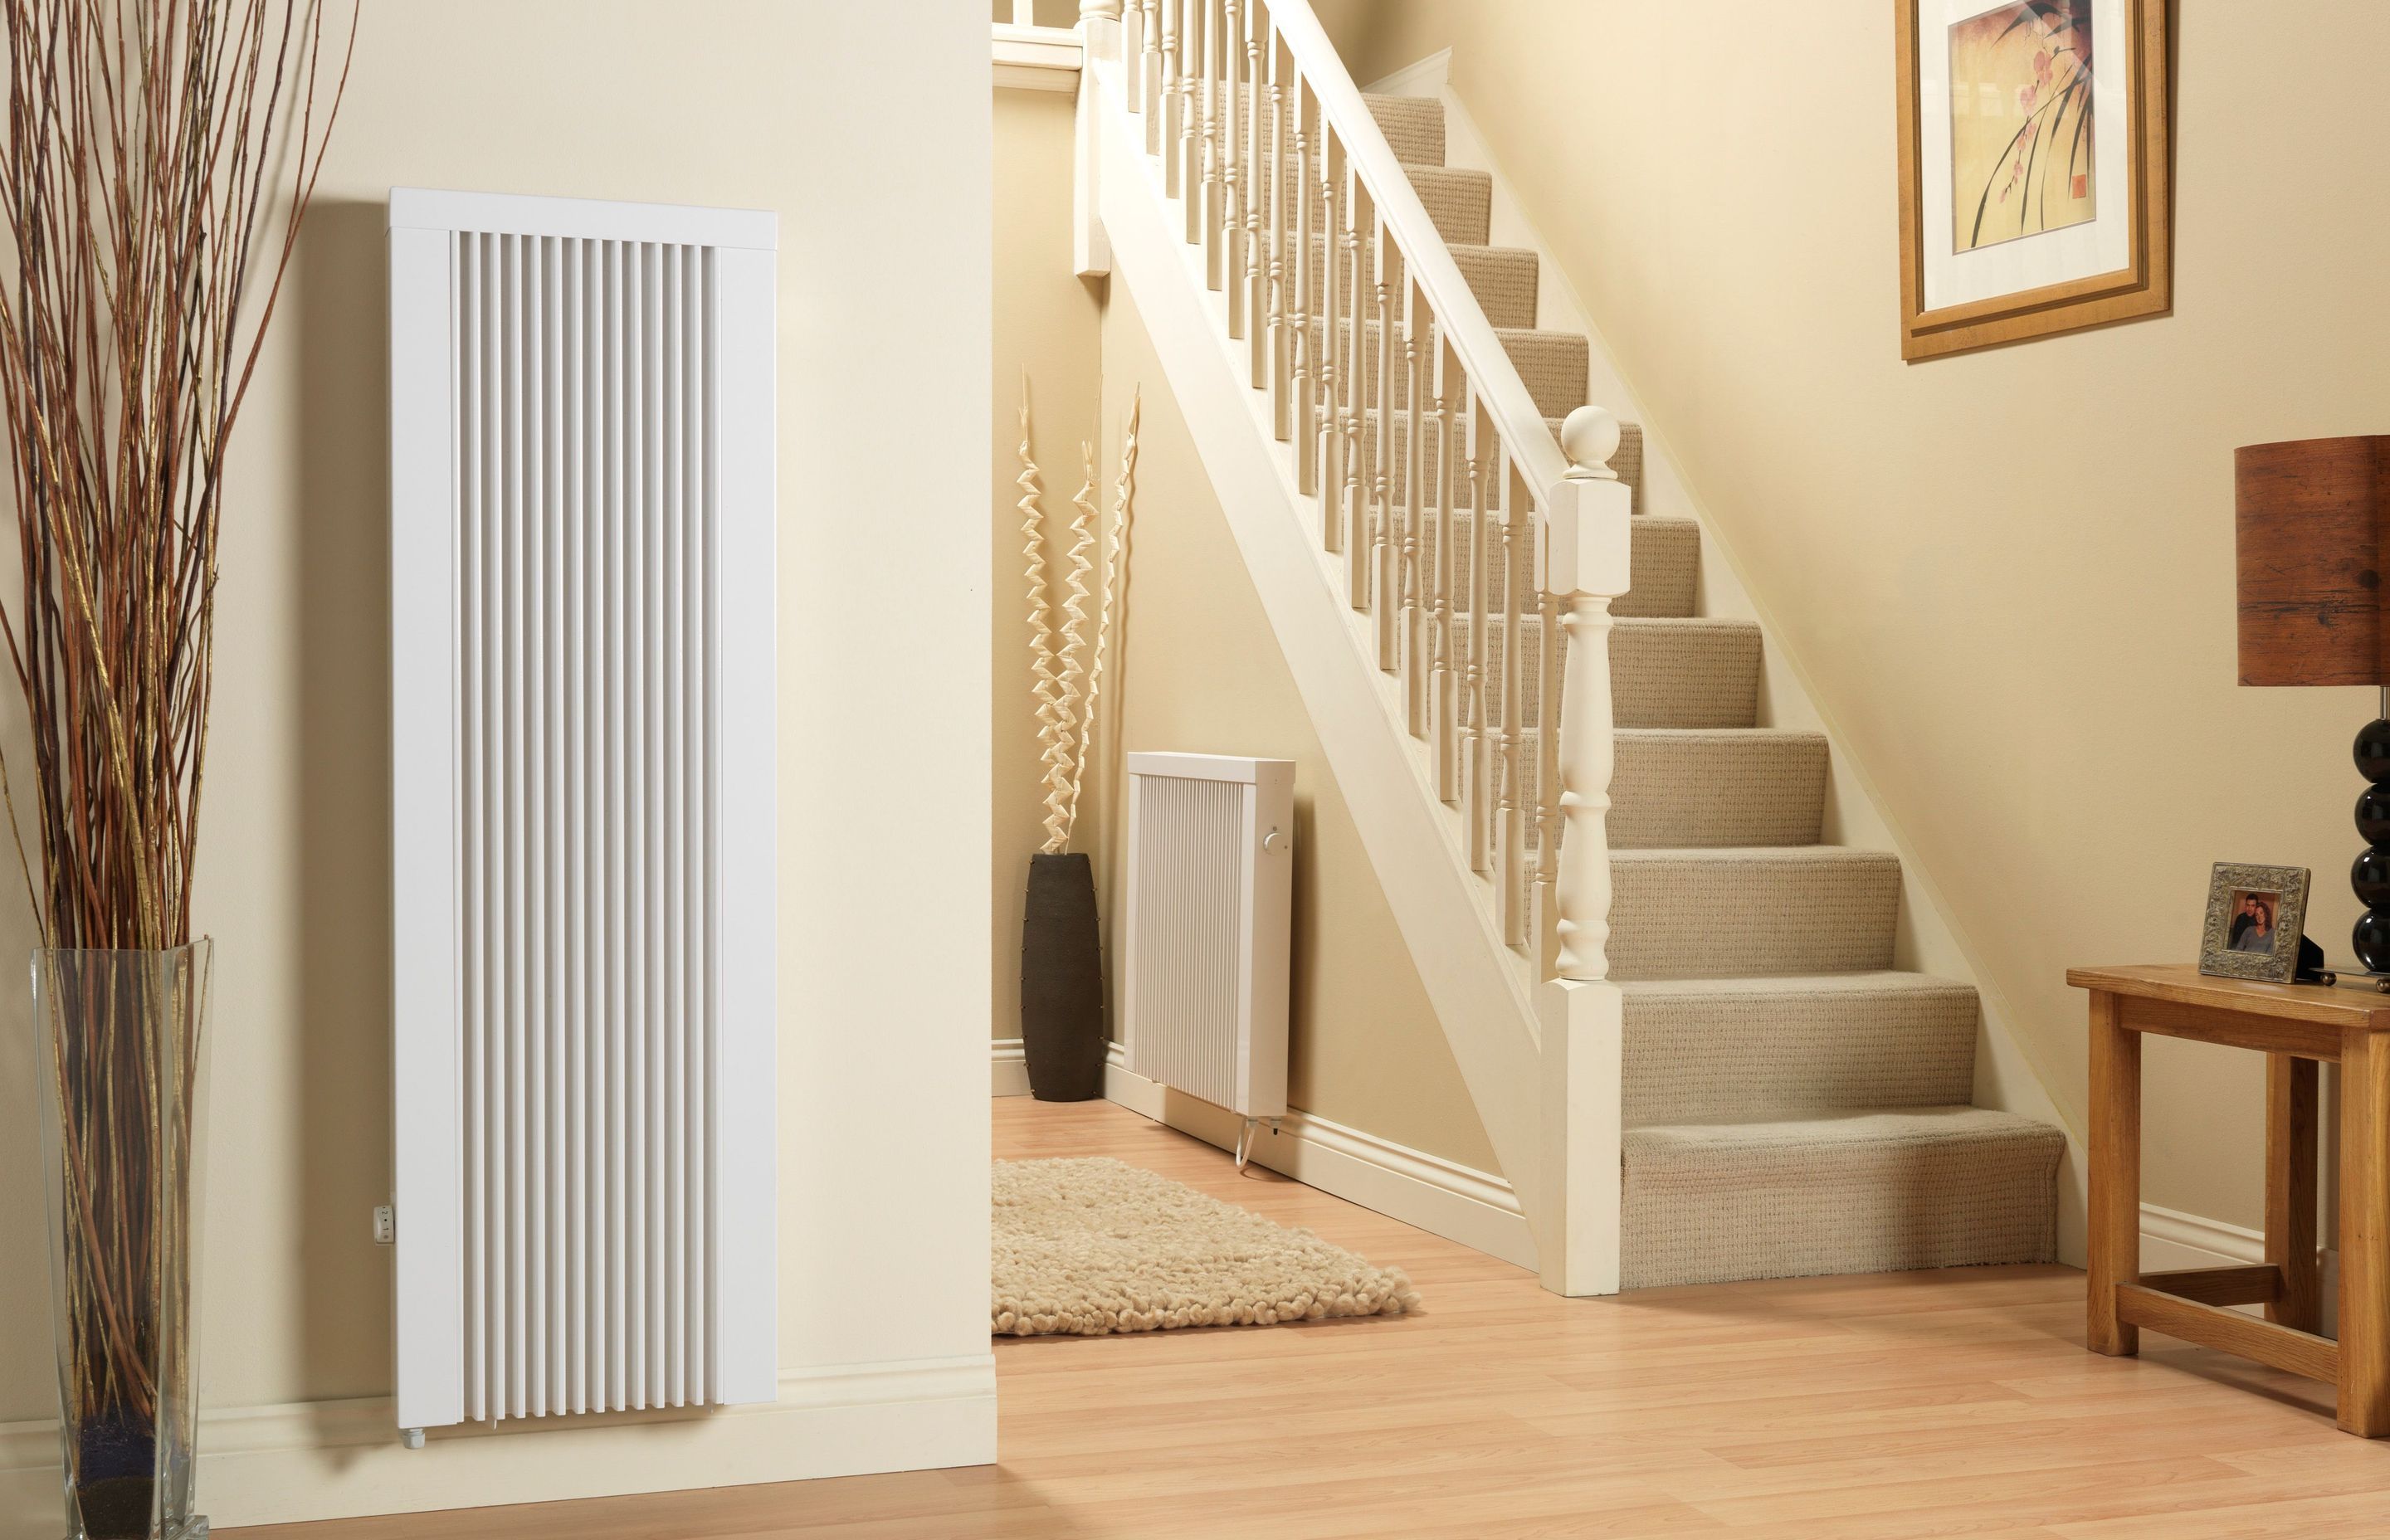 Available from Warm NZ, the LHZ Combination Electric Radiators are the perfect heating solution for rooms where central heating pipework or ducting cannot be installed.